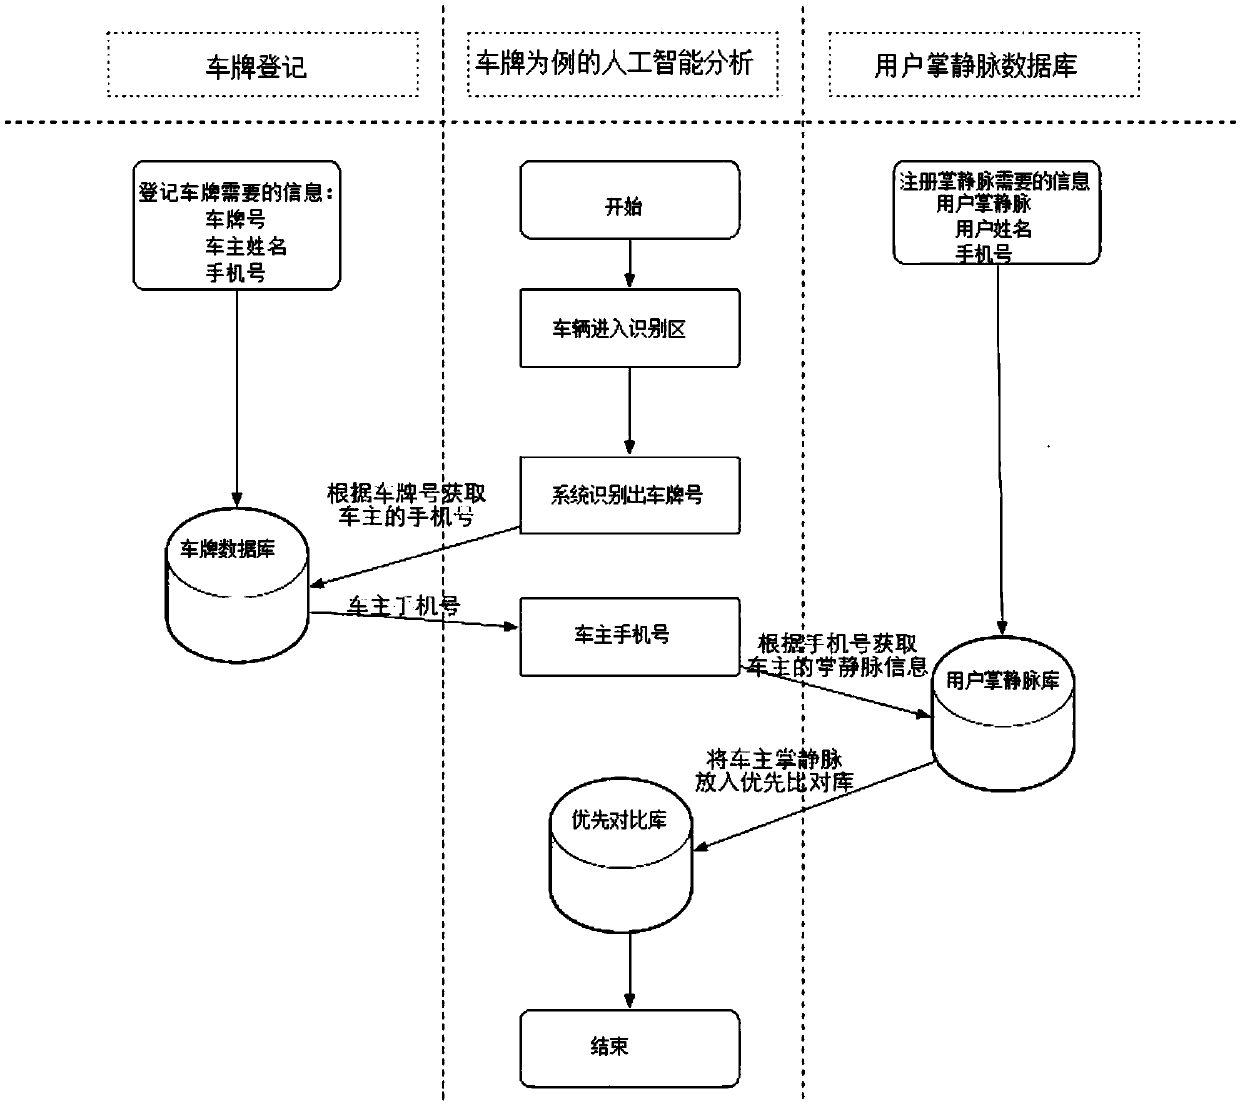 Quick response access control method and system